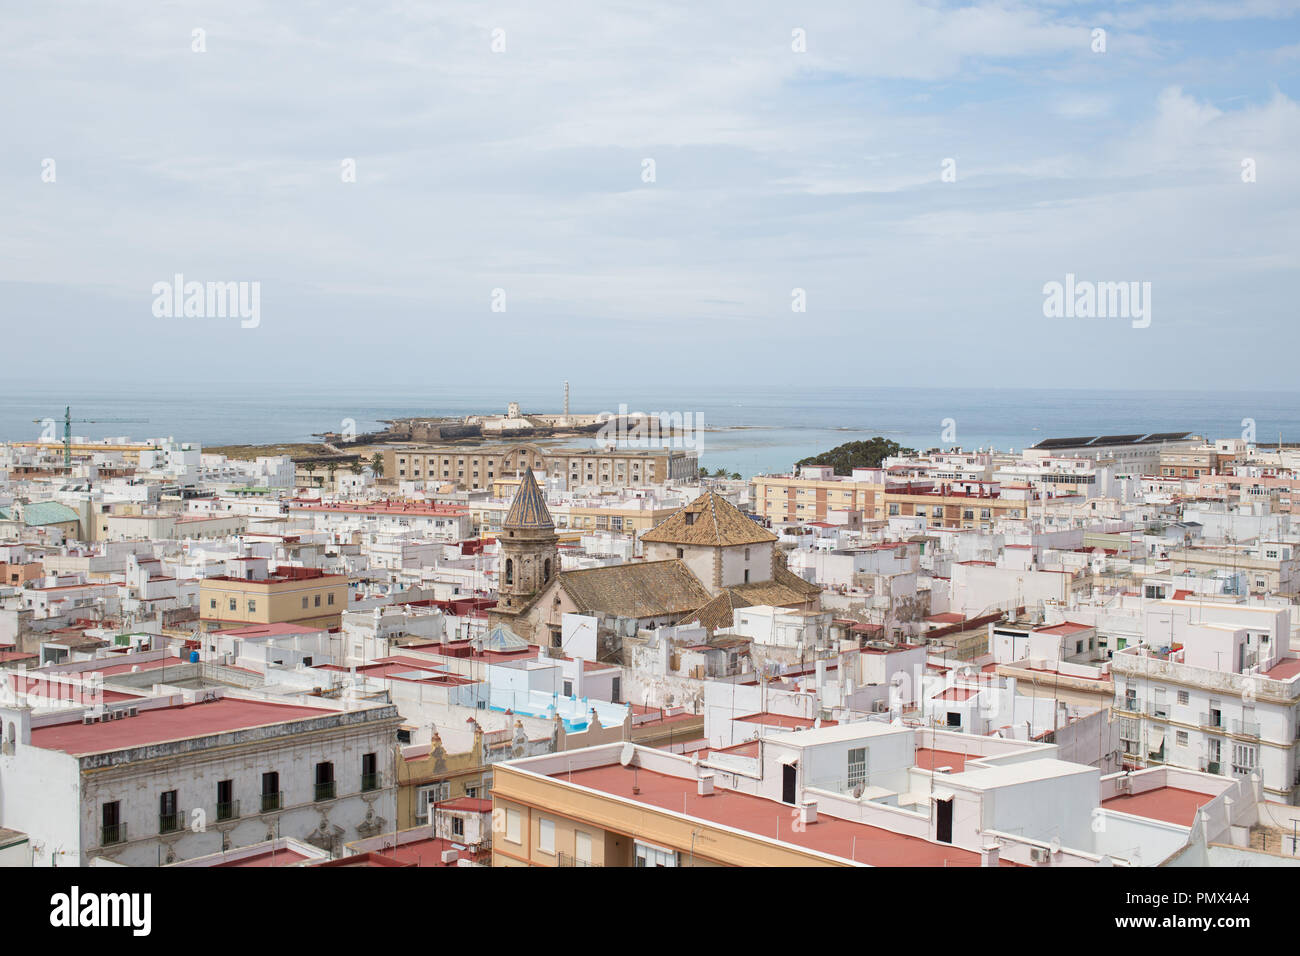 A view looking down on the rooftops of the city of Cadiz in Spain from the Tavira Tower (camera obscura) with the coastline and sea in the distance Stock Photo